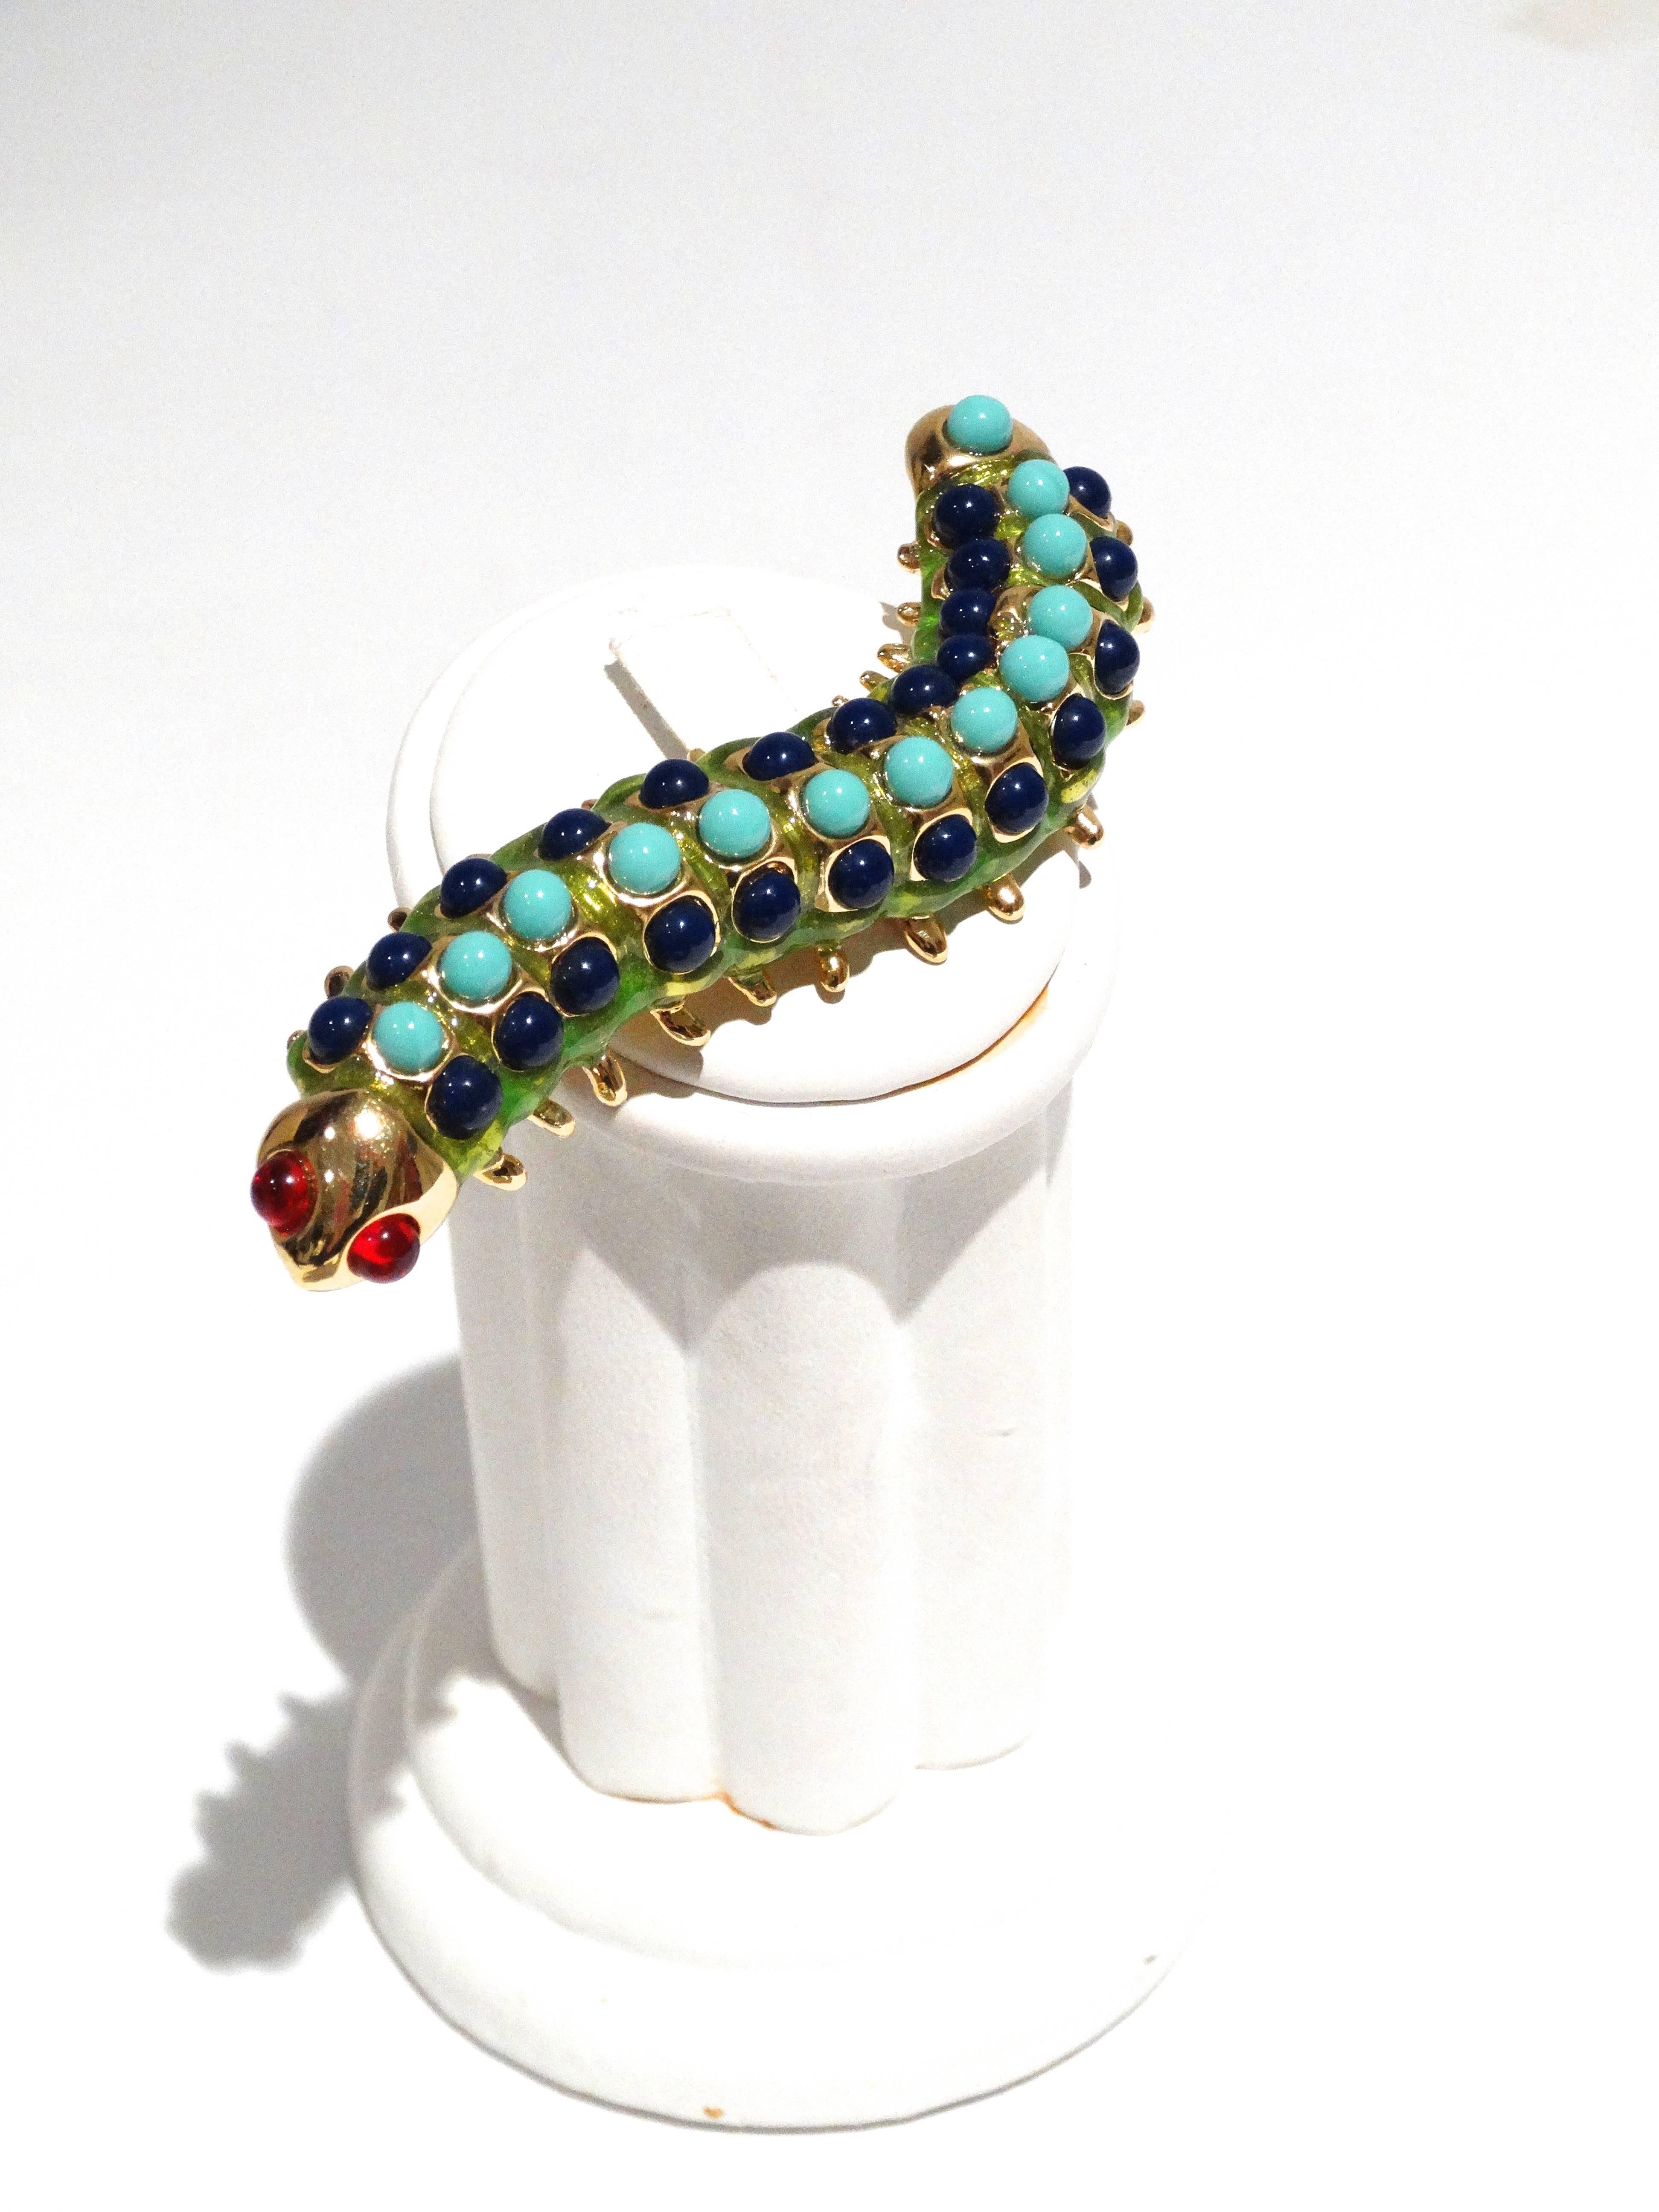 A fun Kenneth Jay Lane Caterpillar brooch circa 1995 in green enamel, glass ruby cabochons, plastic lapis lazuli and turquoise cabochons. Signed KJL. You can also reference this piece in Kenneth Jay Lane's 